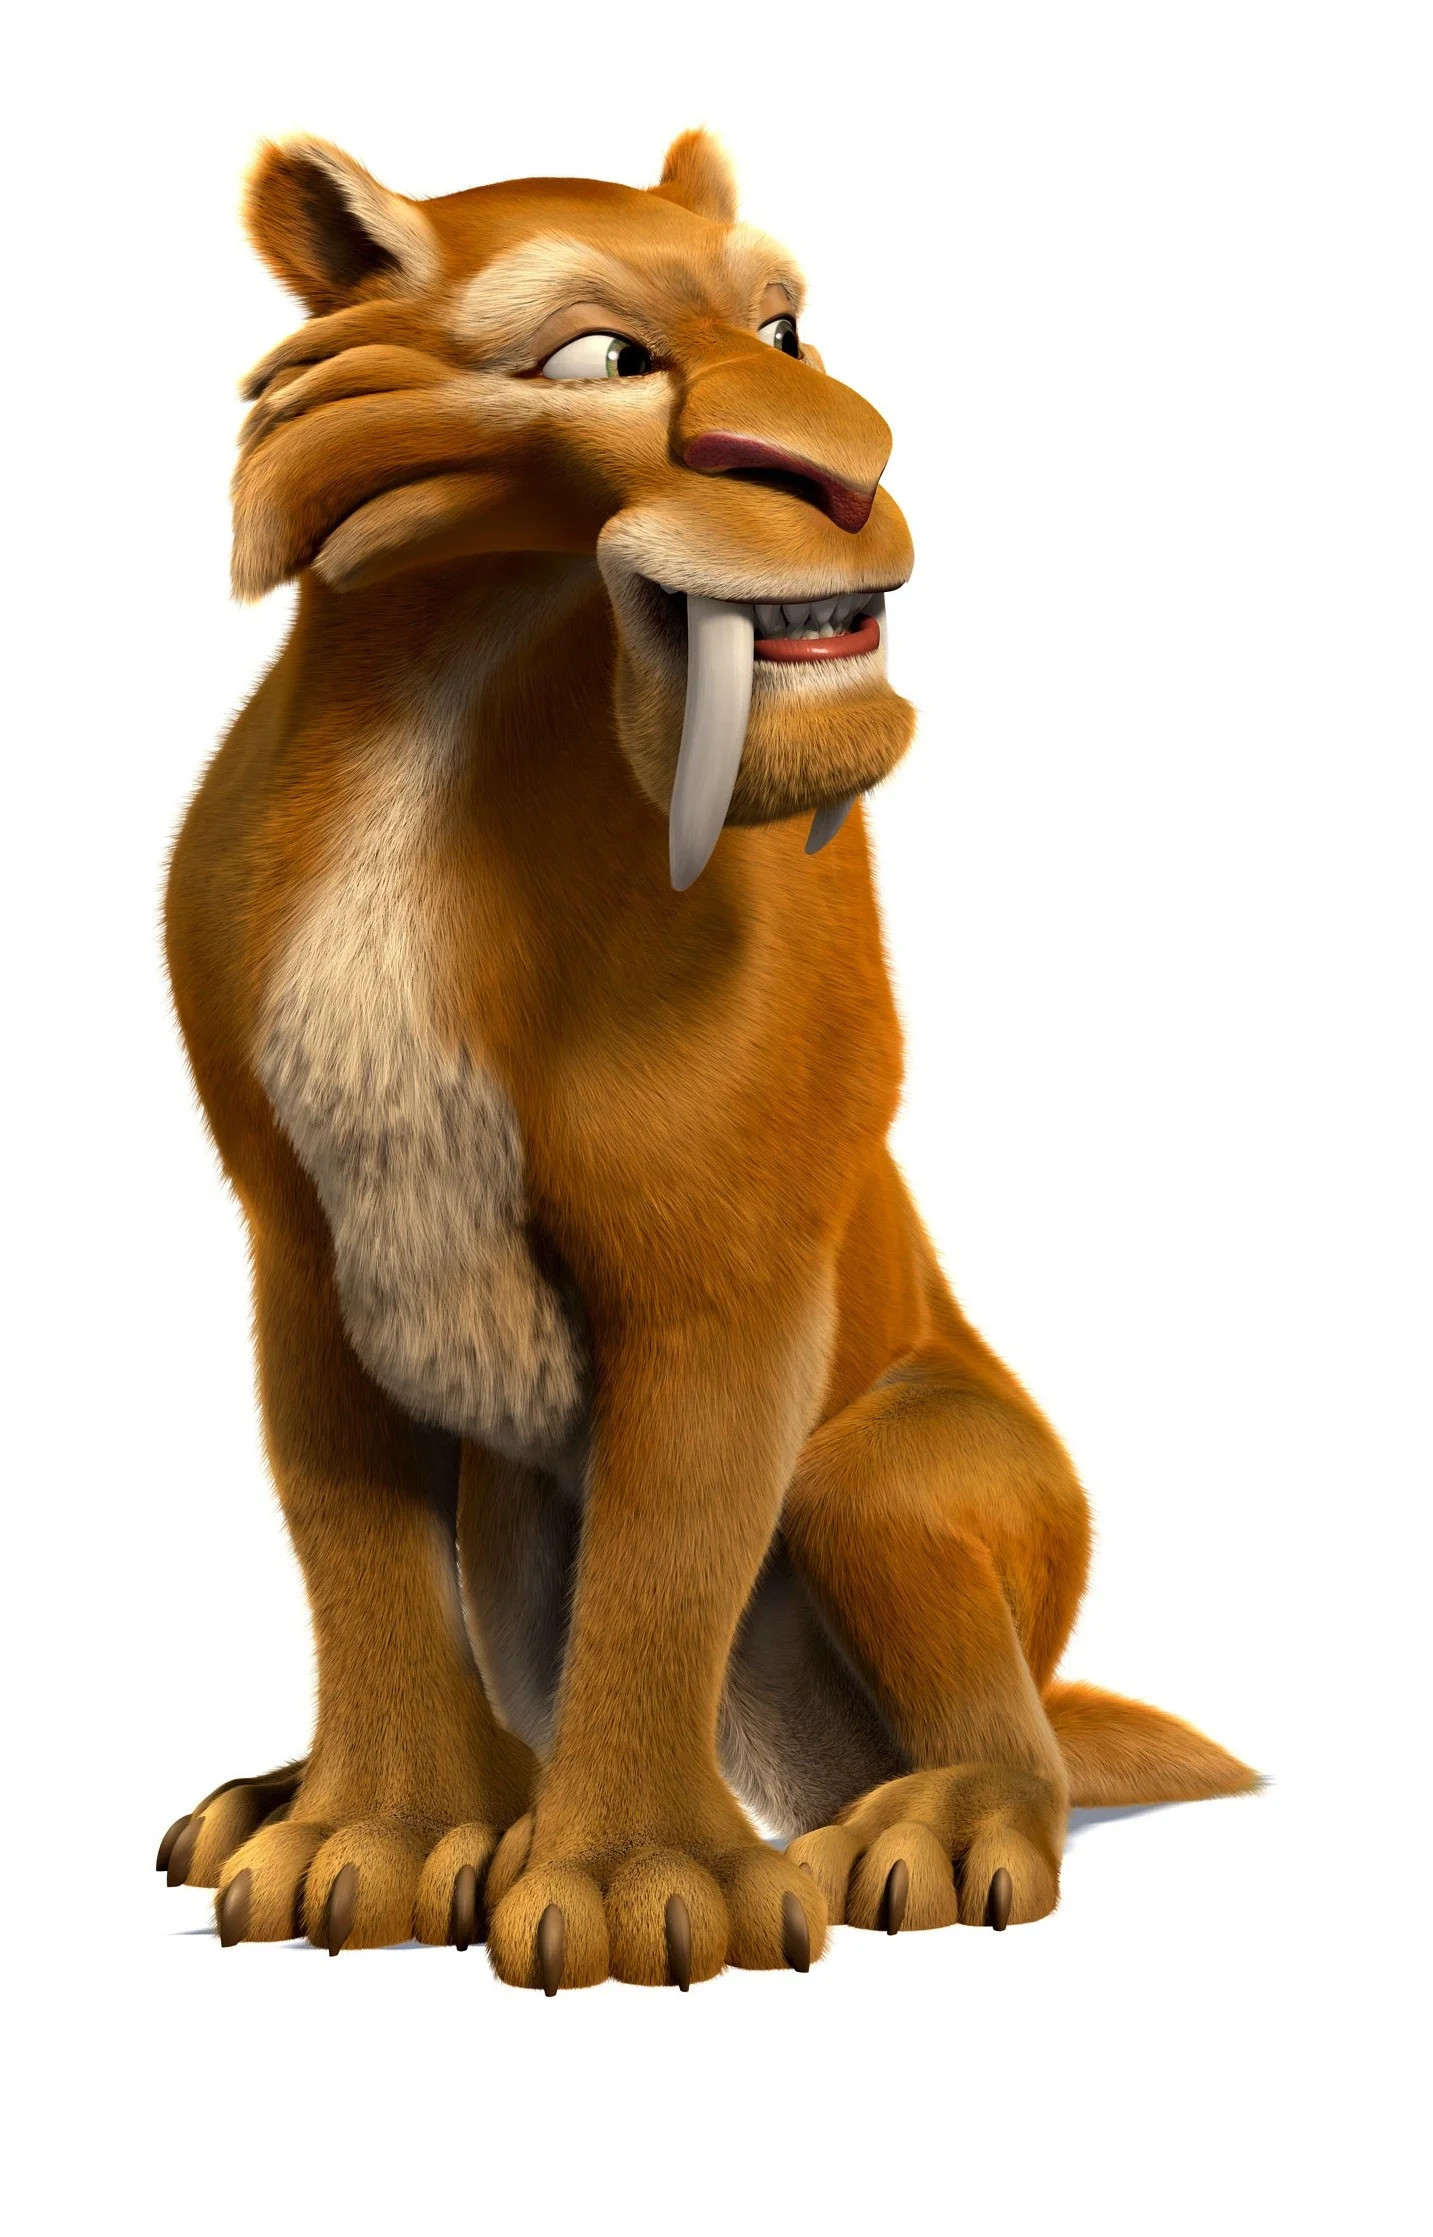 Diego, my favorite character from the Ice Age movies